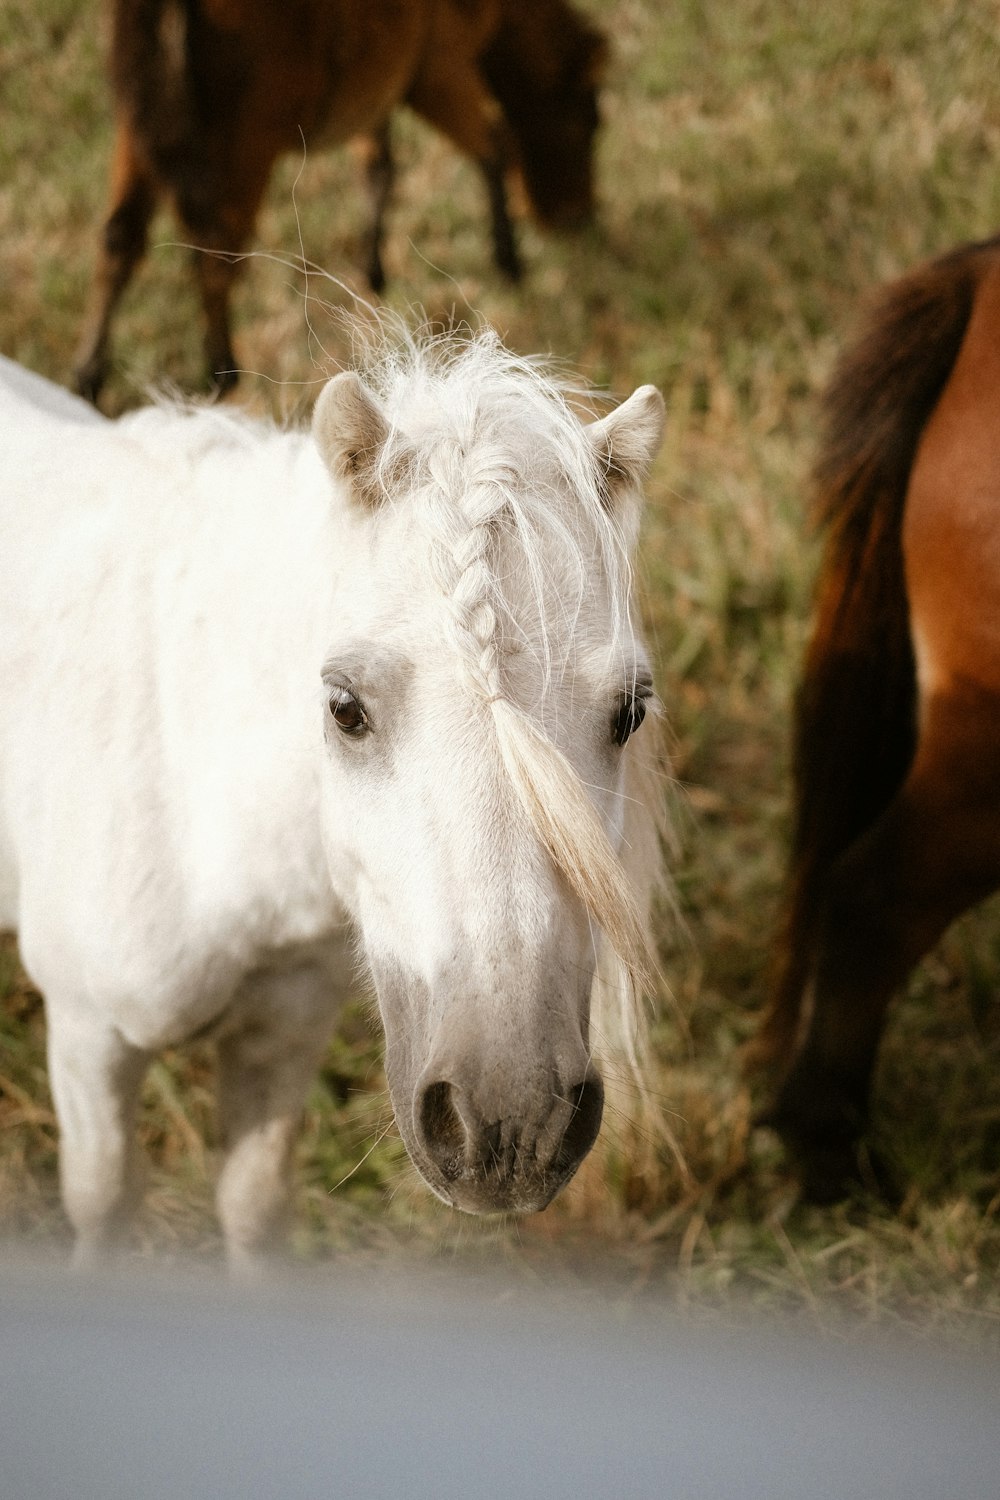 white and brown horse on brown grass field during daytime